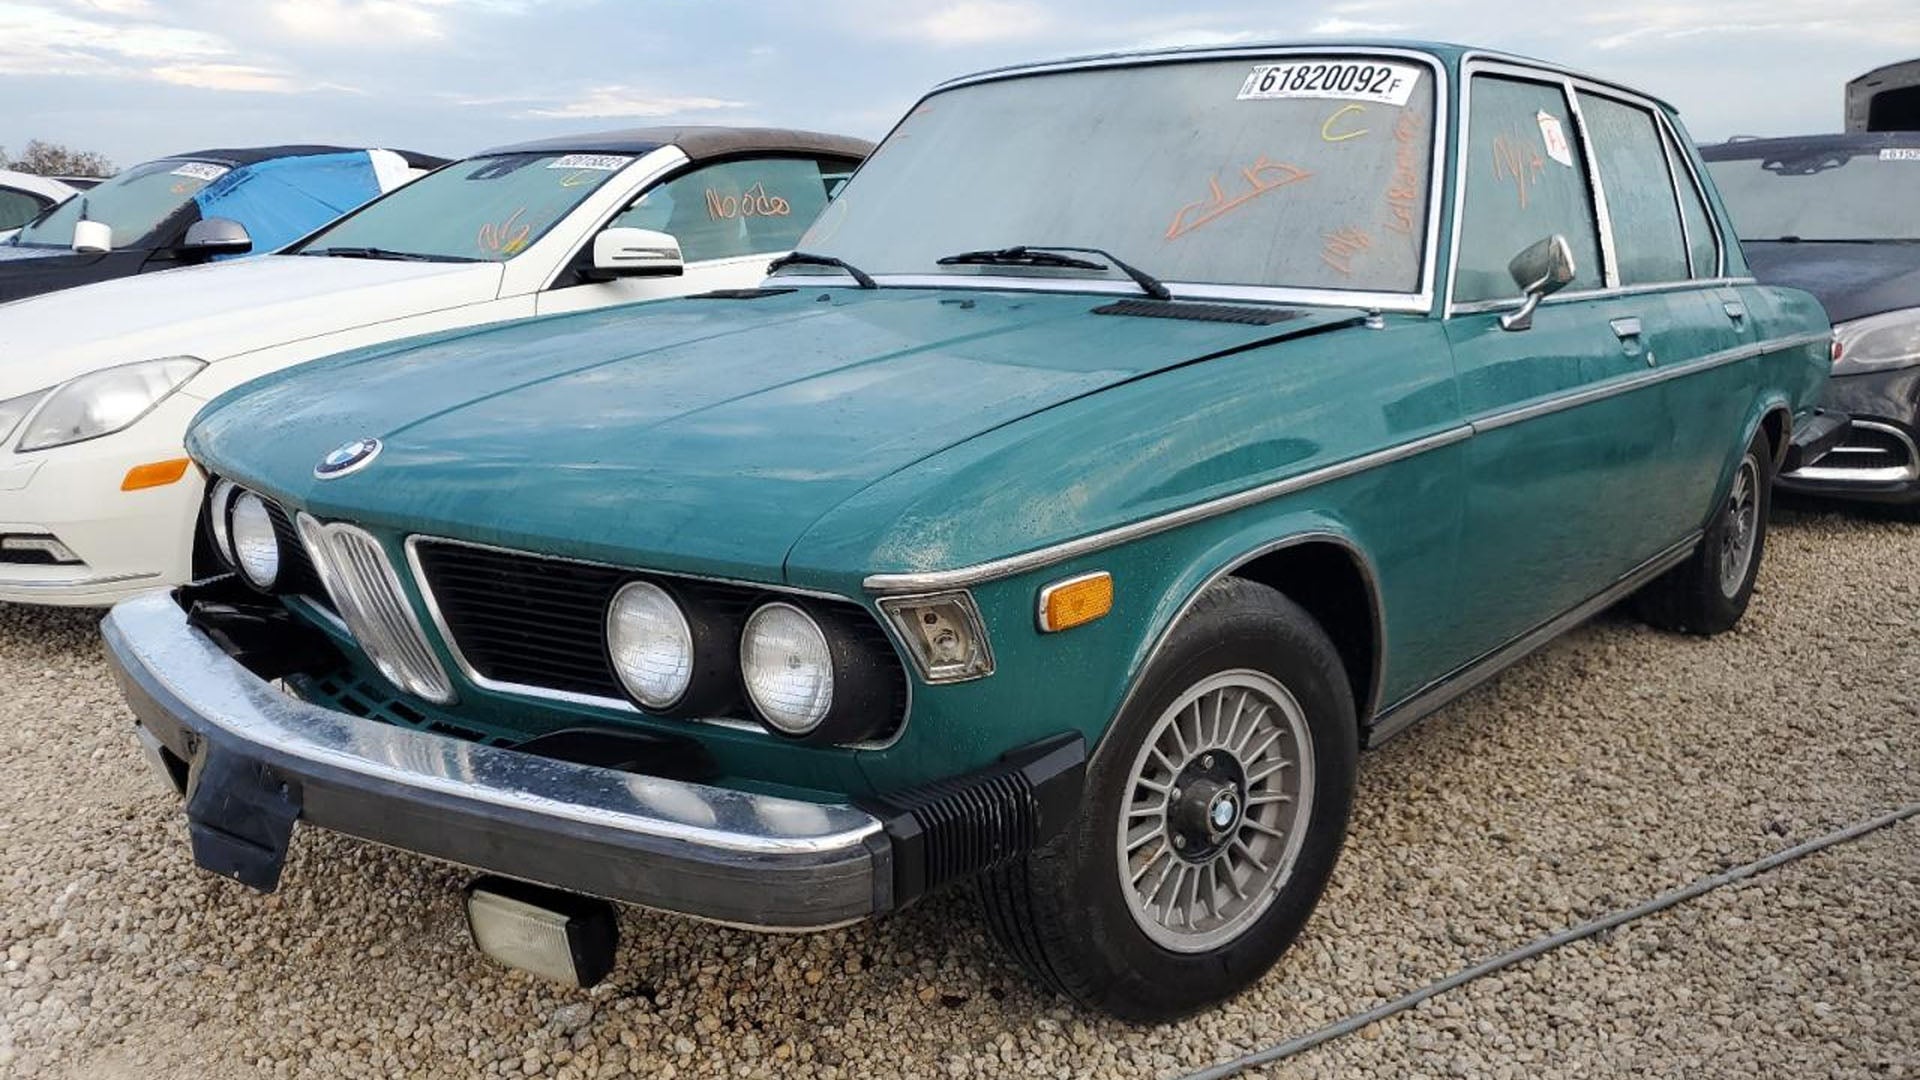 Jackie Kennedy’s 1974 BMW Bavaria Is Sitting on a Salvage Auction Lot in Florida